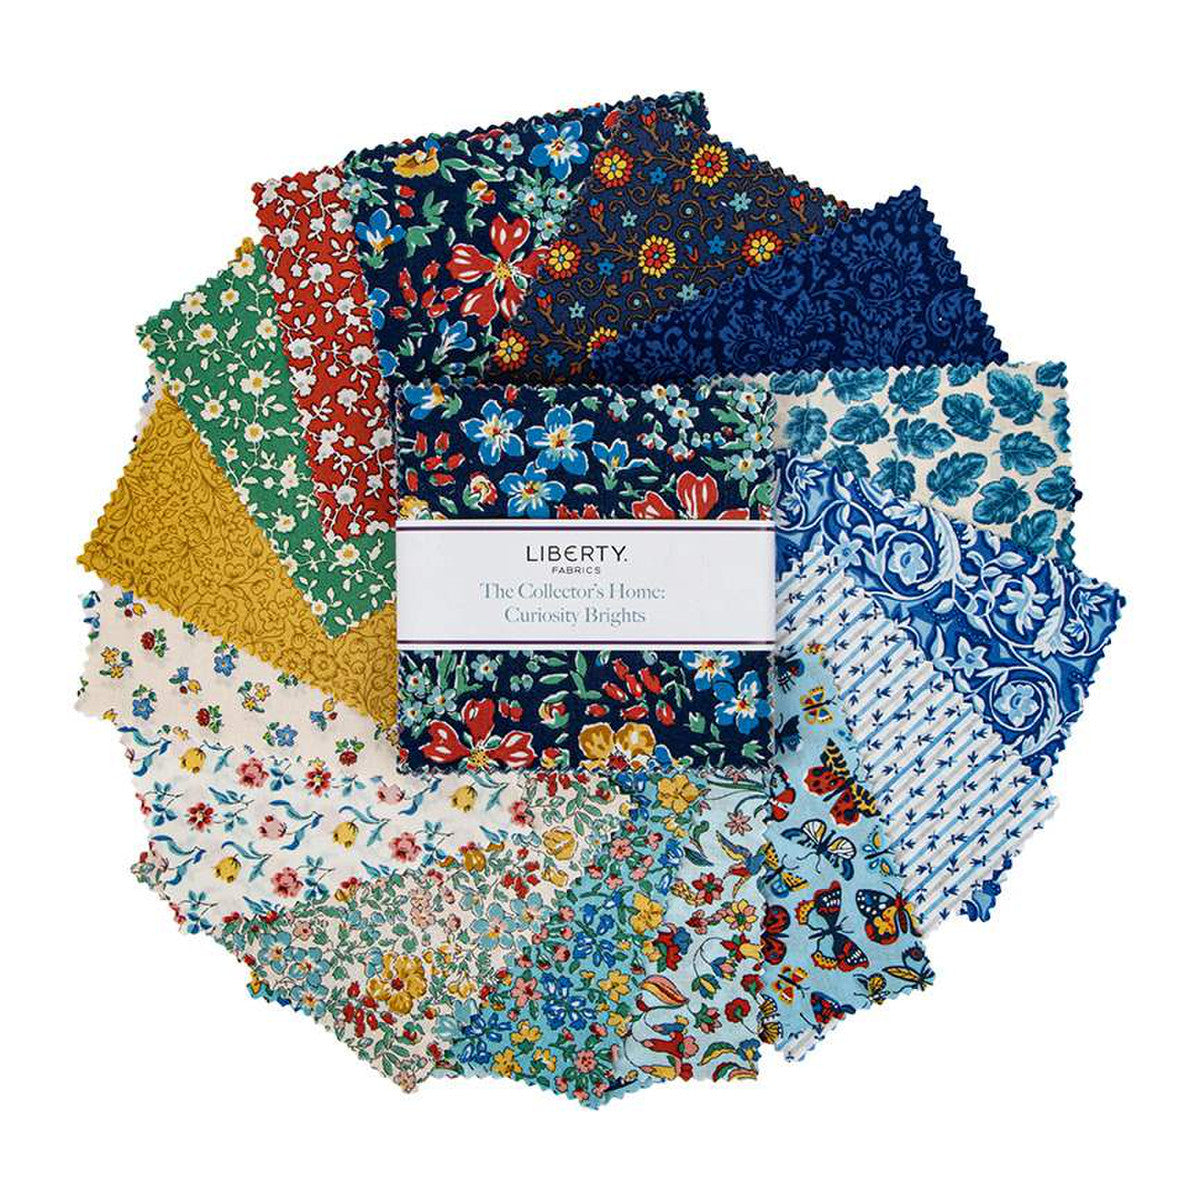 The Collector's Home Curiosity Brights by Liberty Fabrics